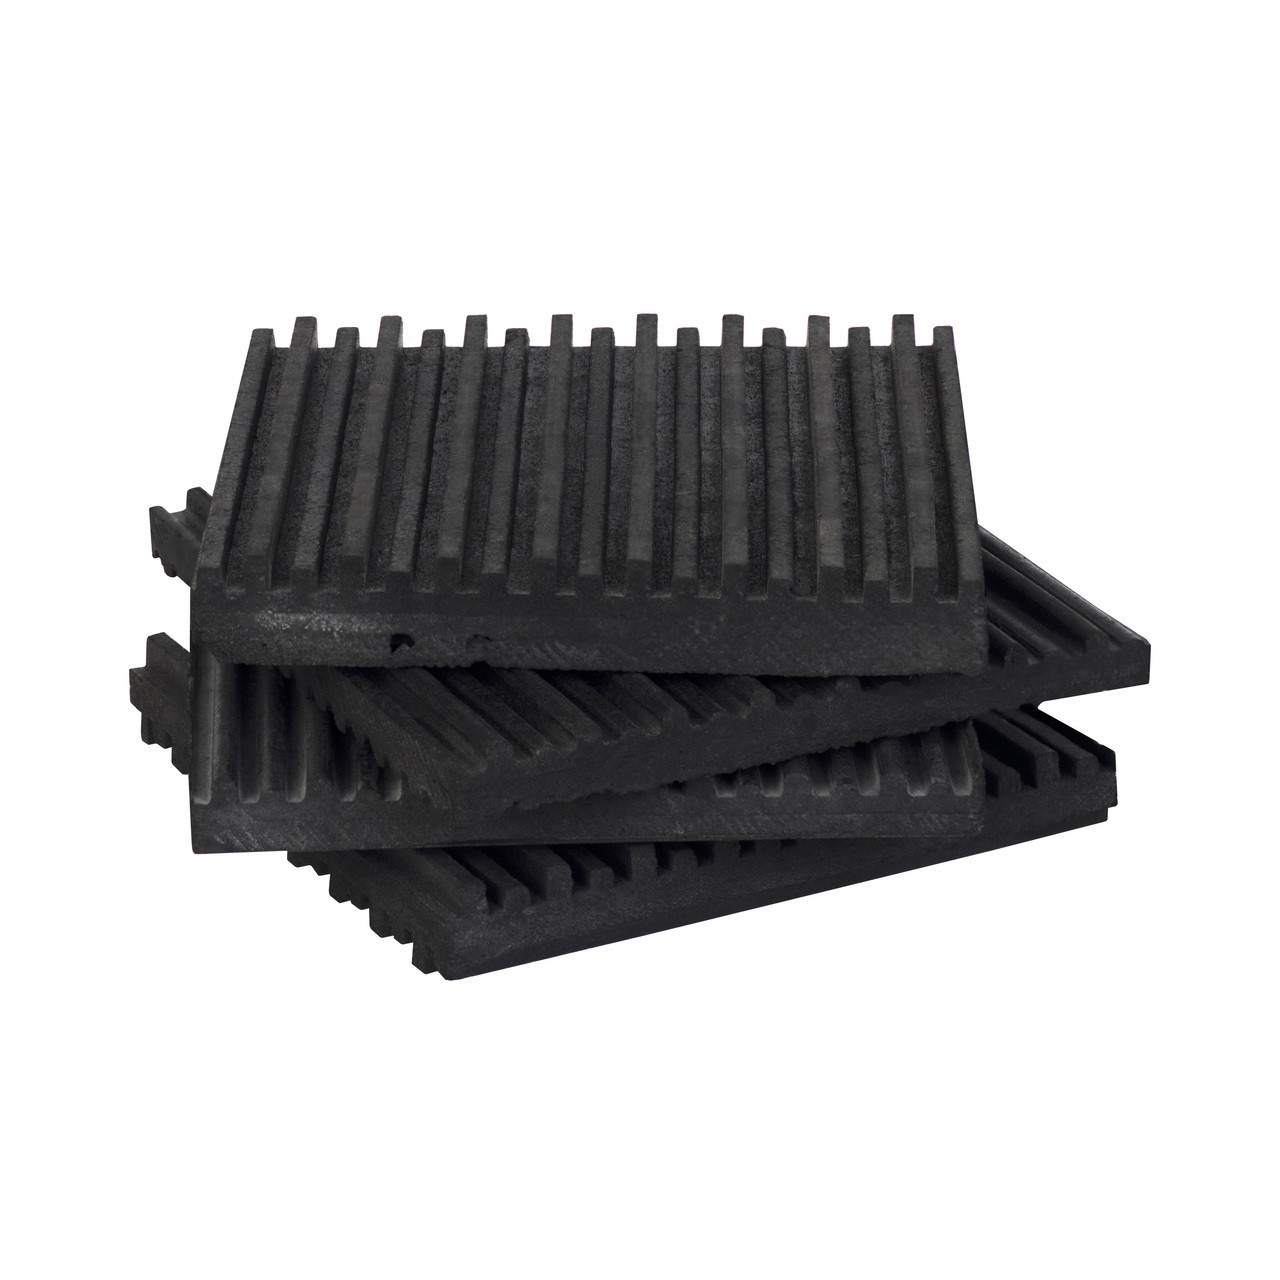 2 6" x 6" x 3/4" Anti Vibration Pads • Heavy Duty All Rubber Isolation Pad 